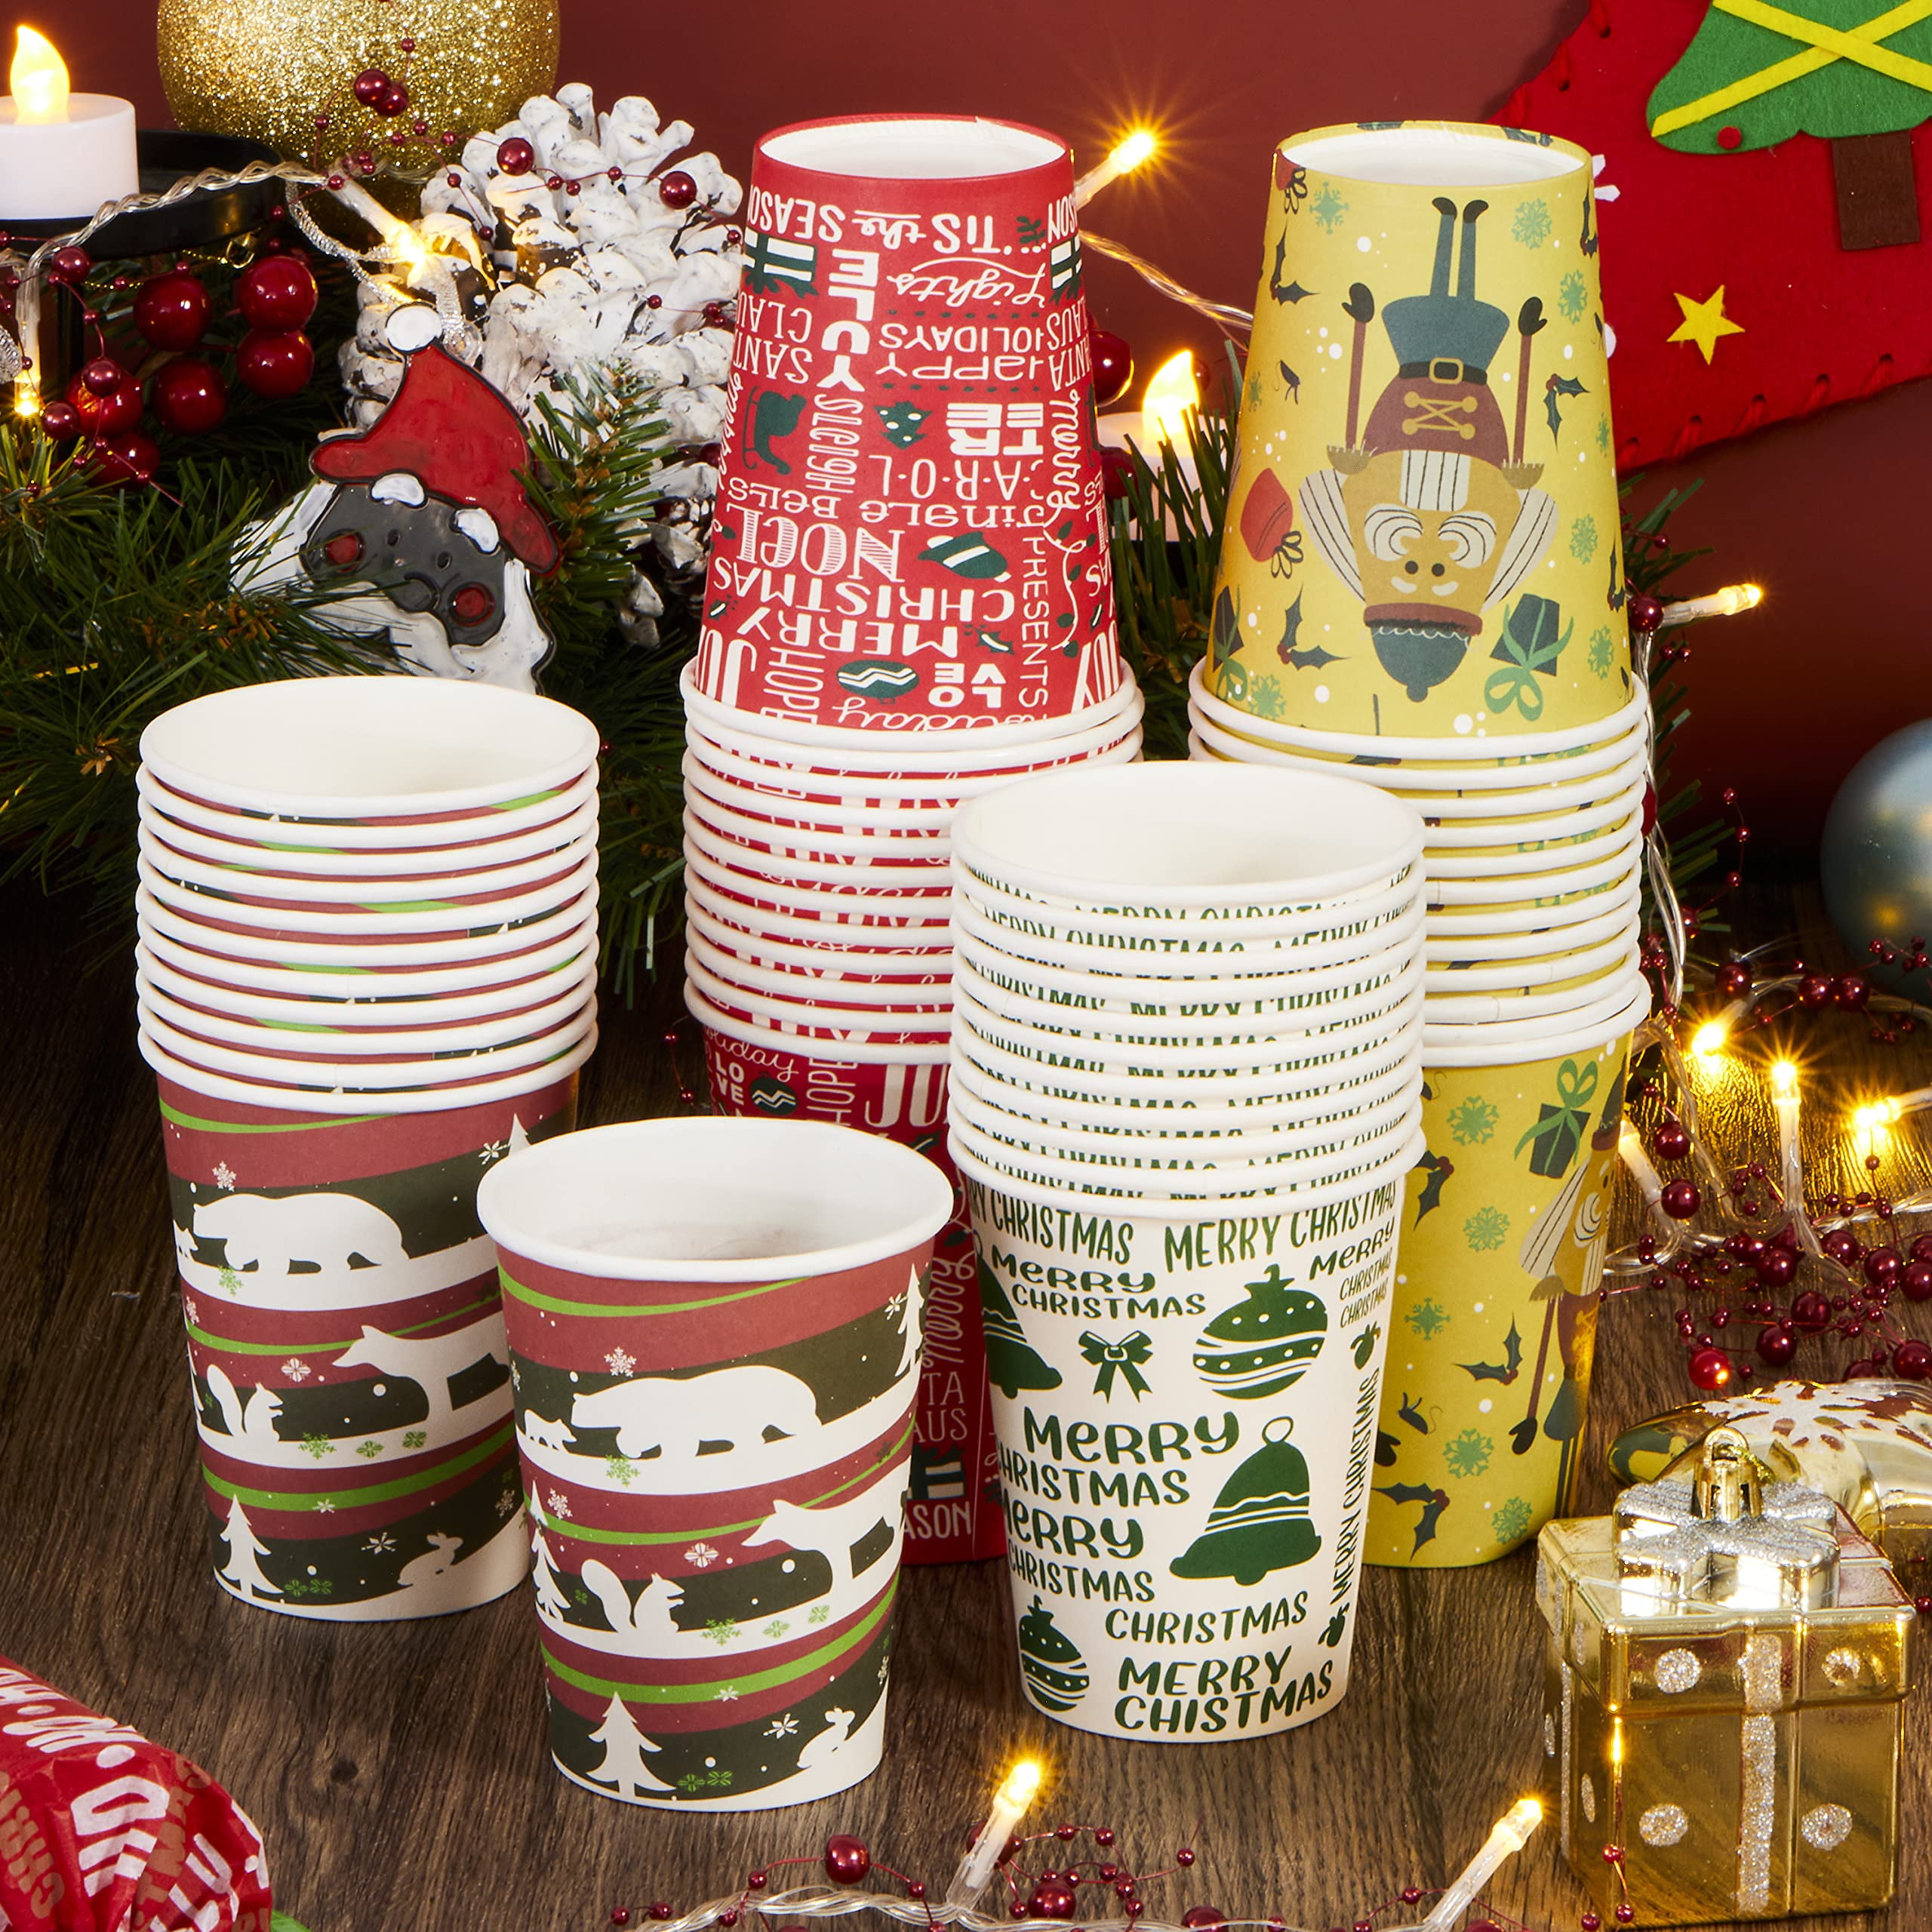 4E's Novelty Christmas Paper Cups Disposable 16 oz With Lids & Napkins (12  Packs) for Christmas Hot …See more 4E's Novelty Christmas Paper Cups